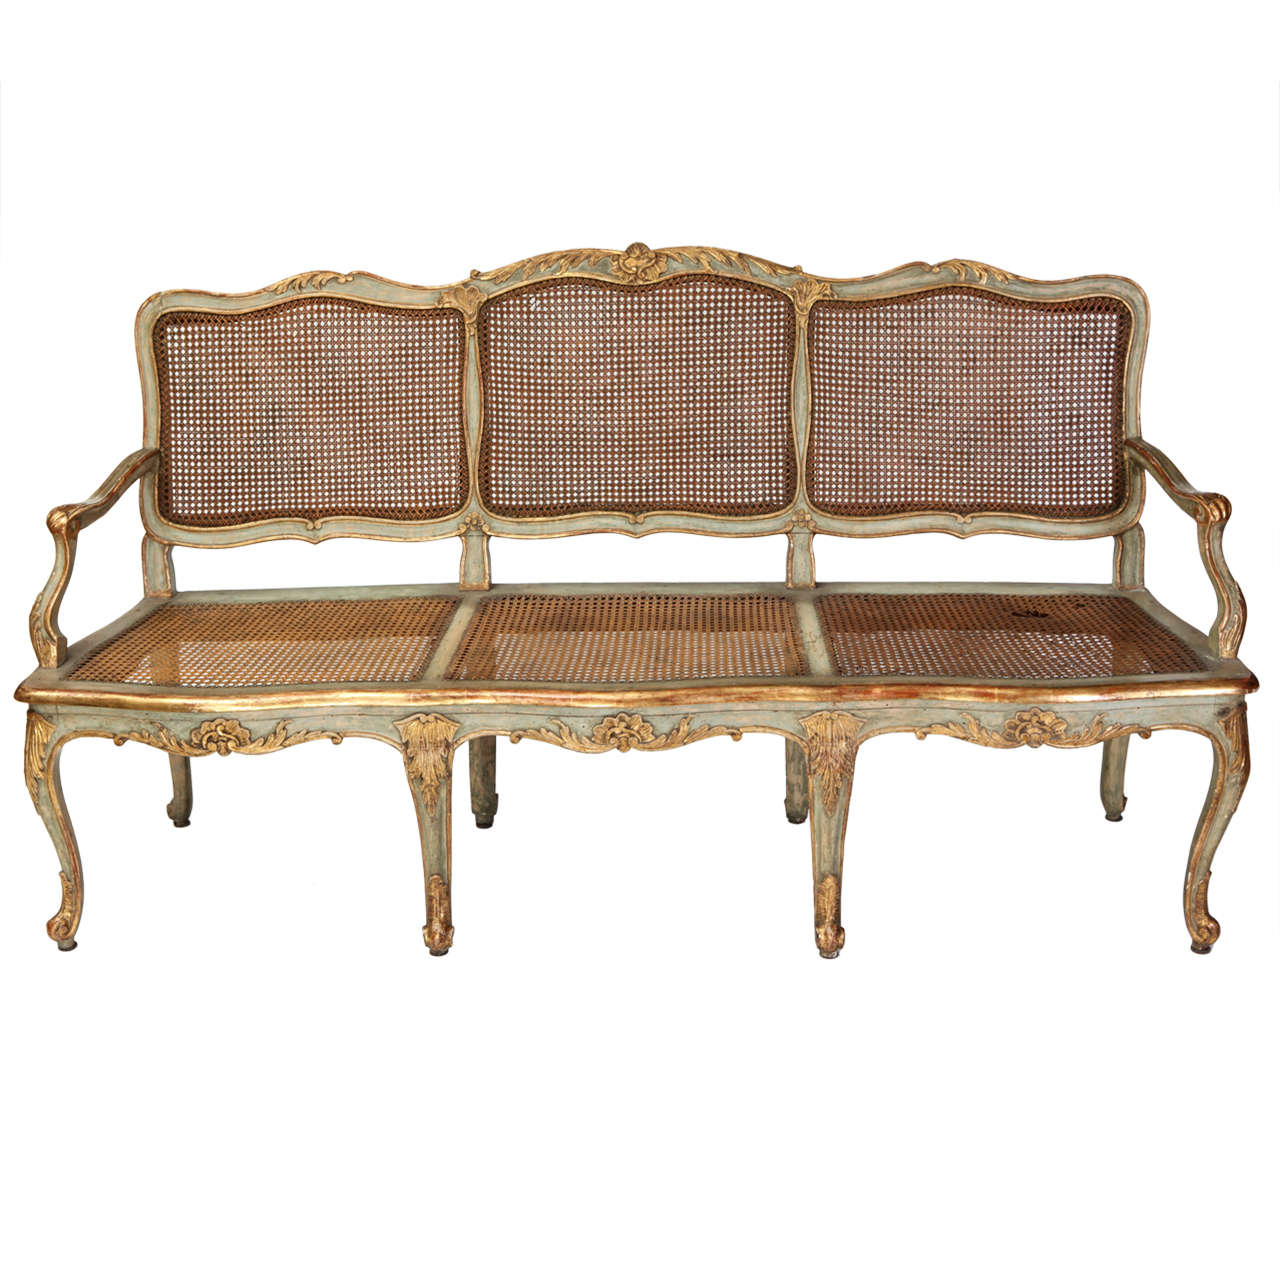  Italian Parcel-Gilt and Painted Canape or Sofa, 18th Century